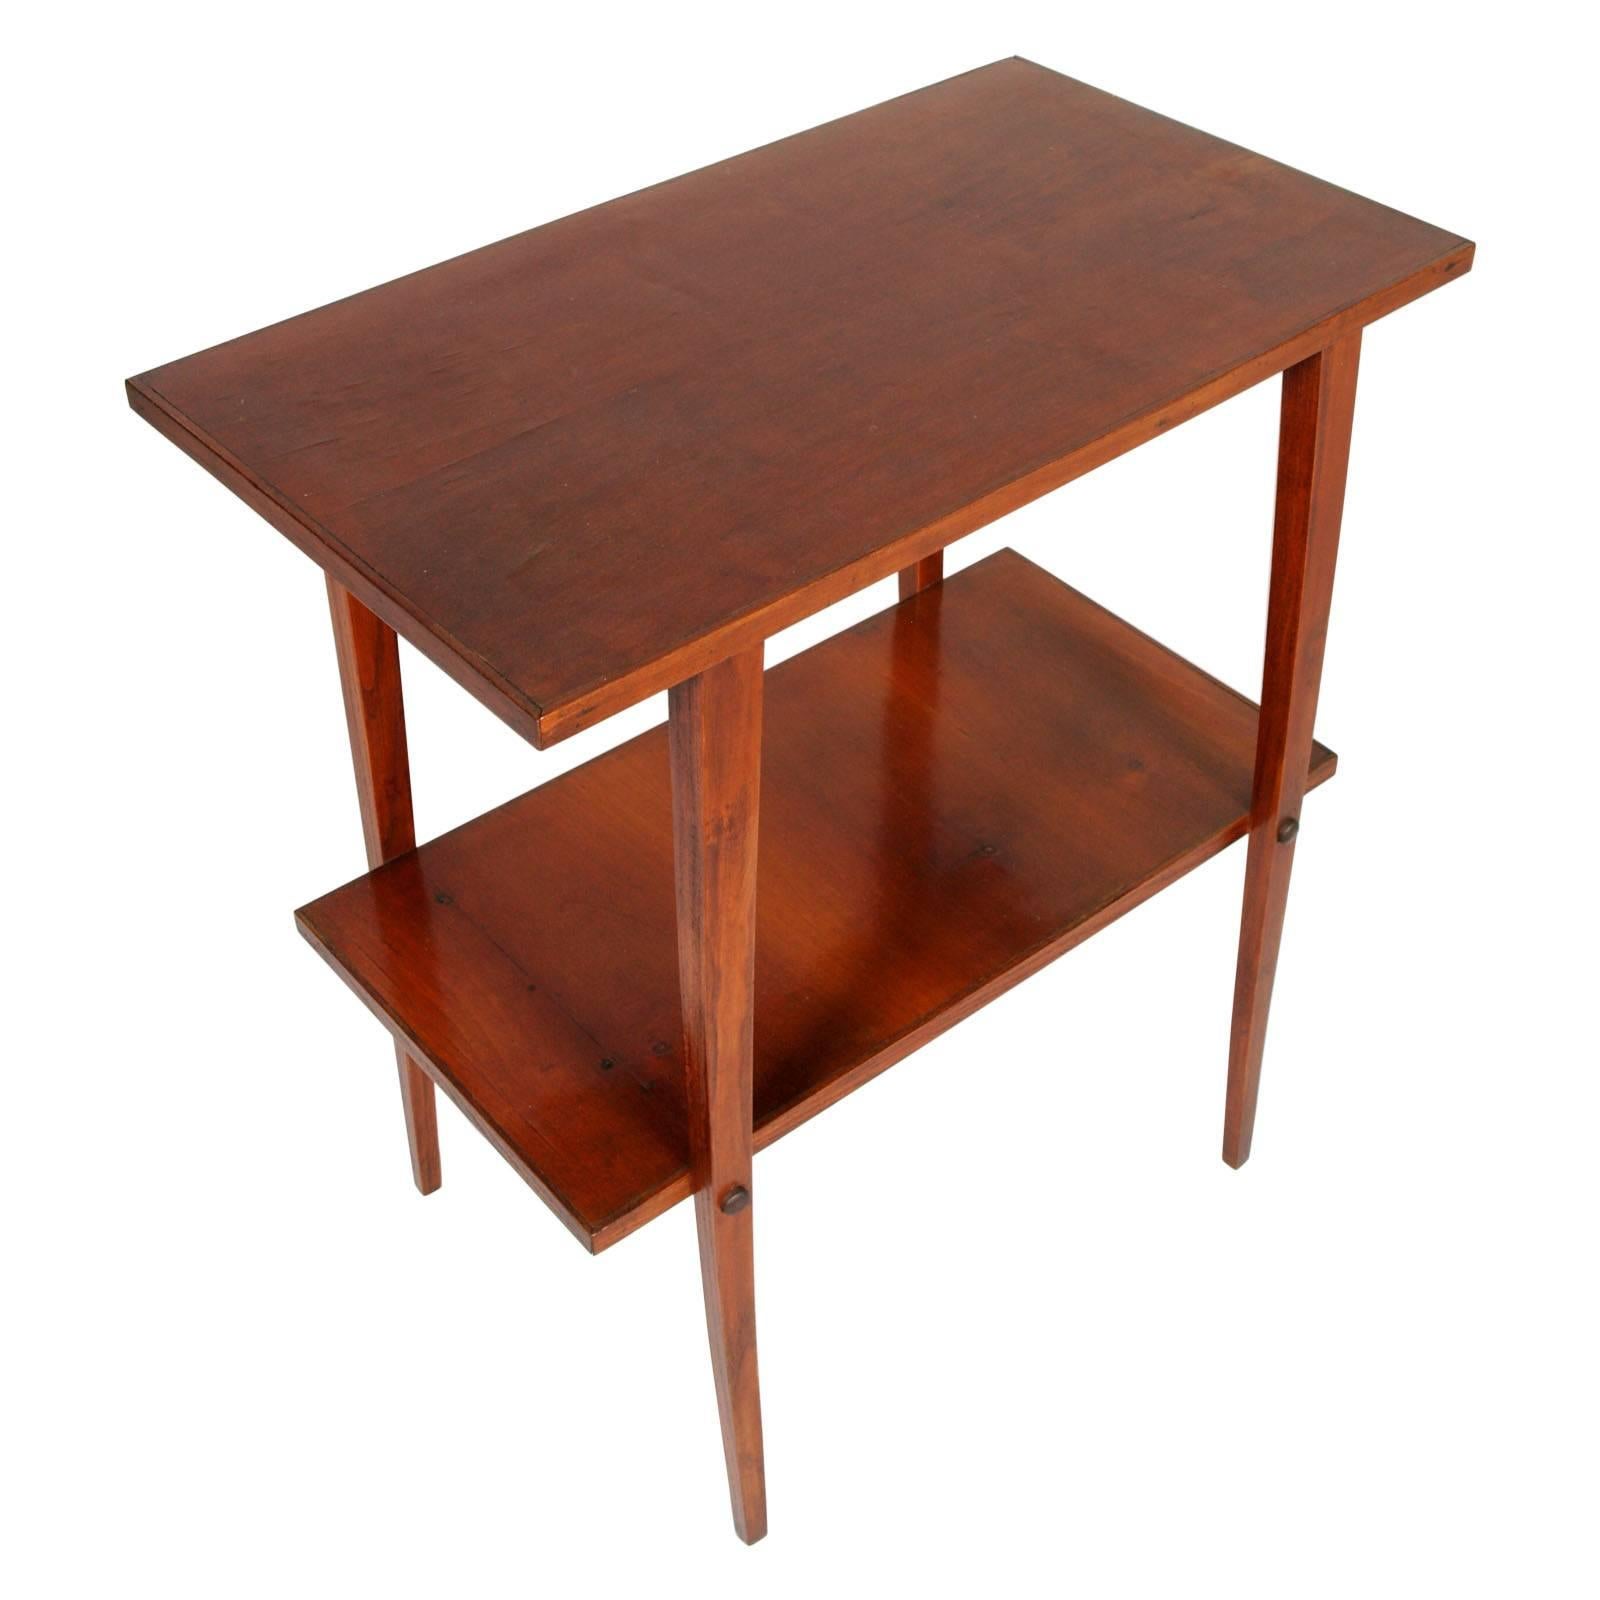 Midcentury  Art Deco style console or occasional side table  in walnut wax polished

Measures cm: H 78 x W 72 x D 41 (internal shelves H 39cm).